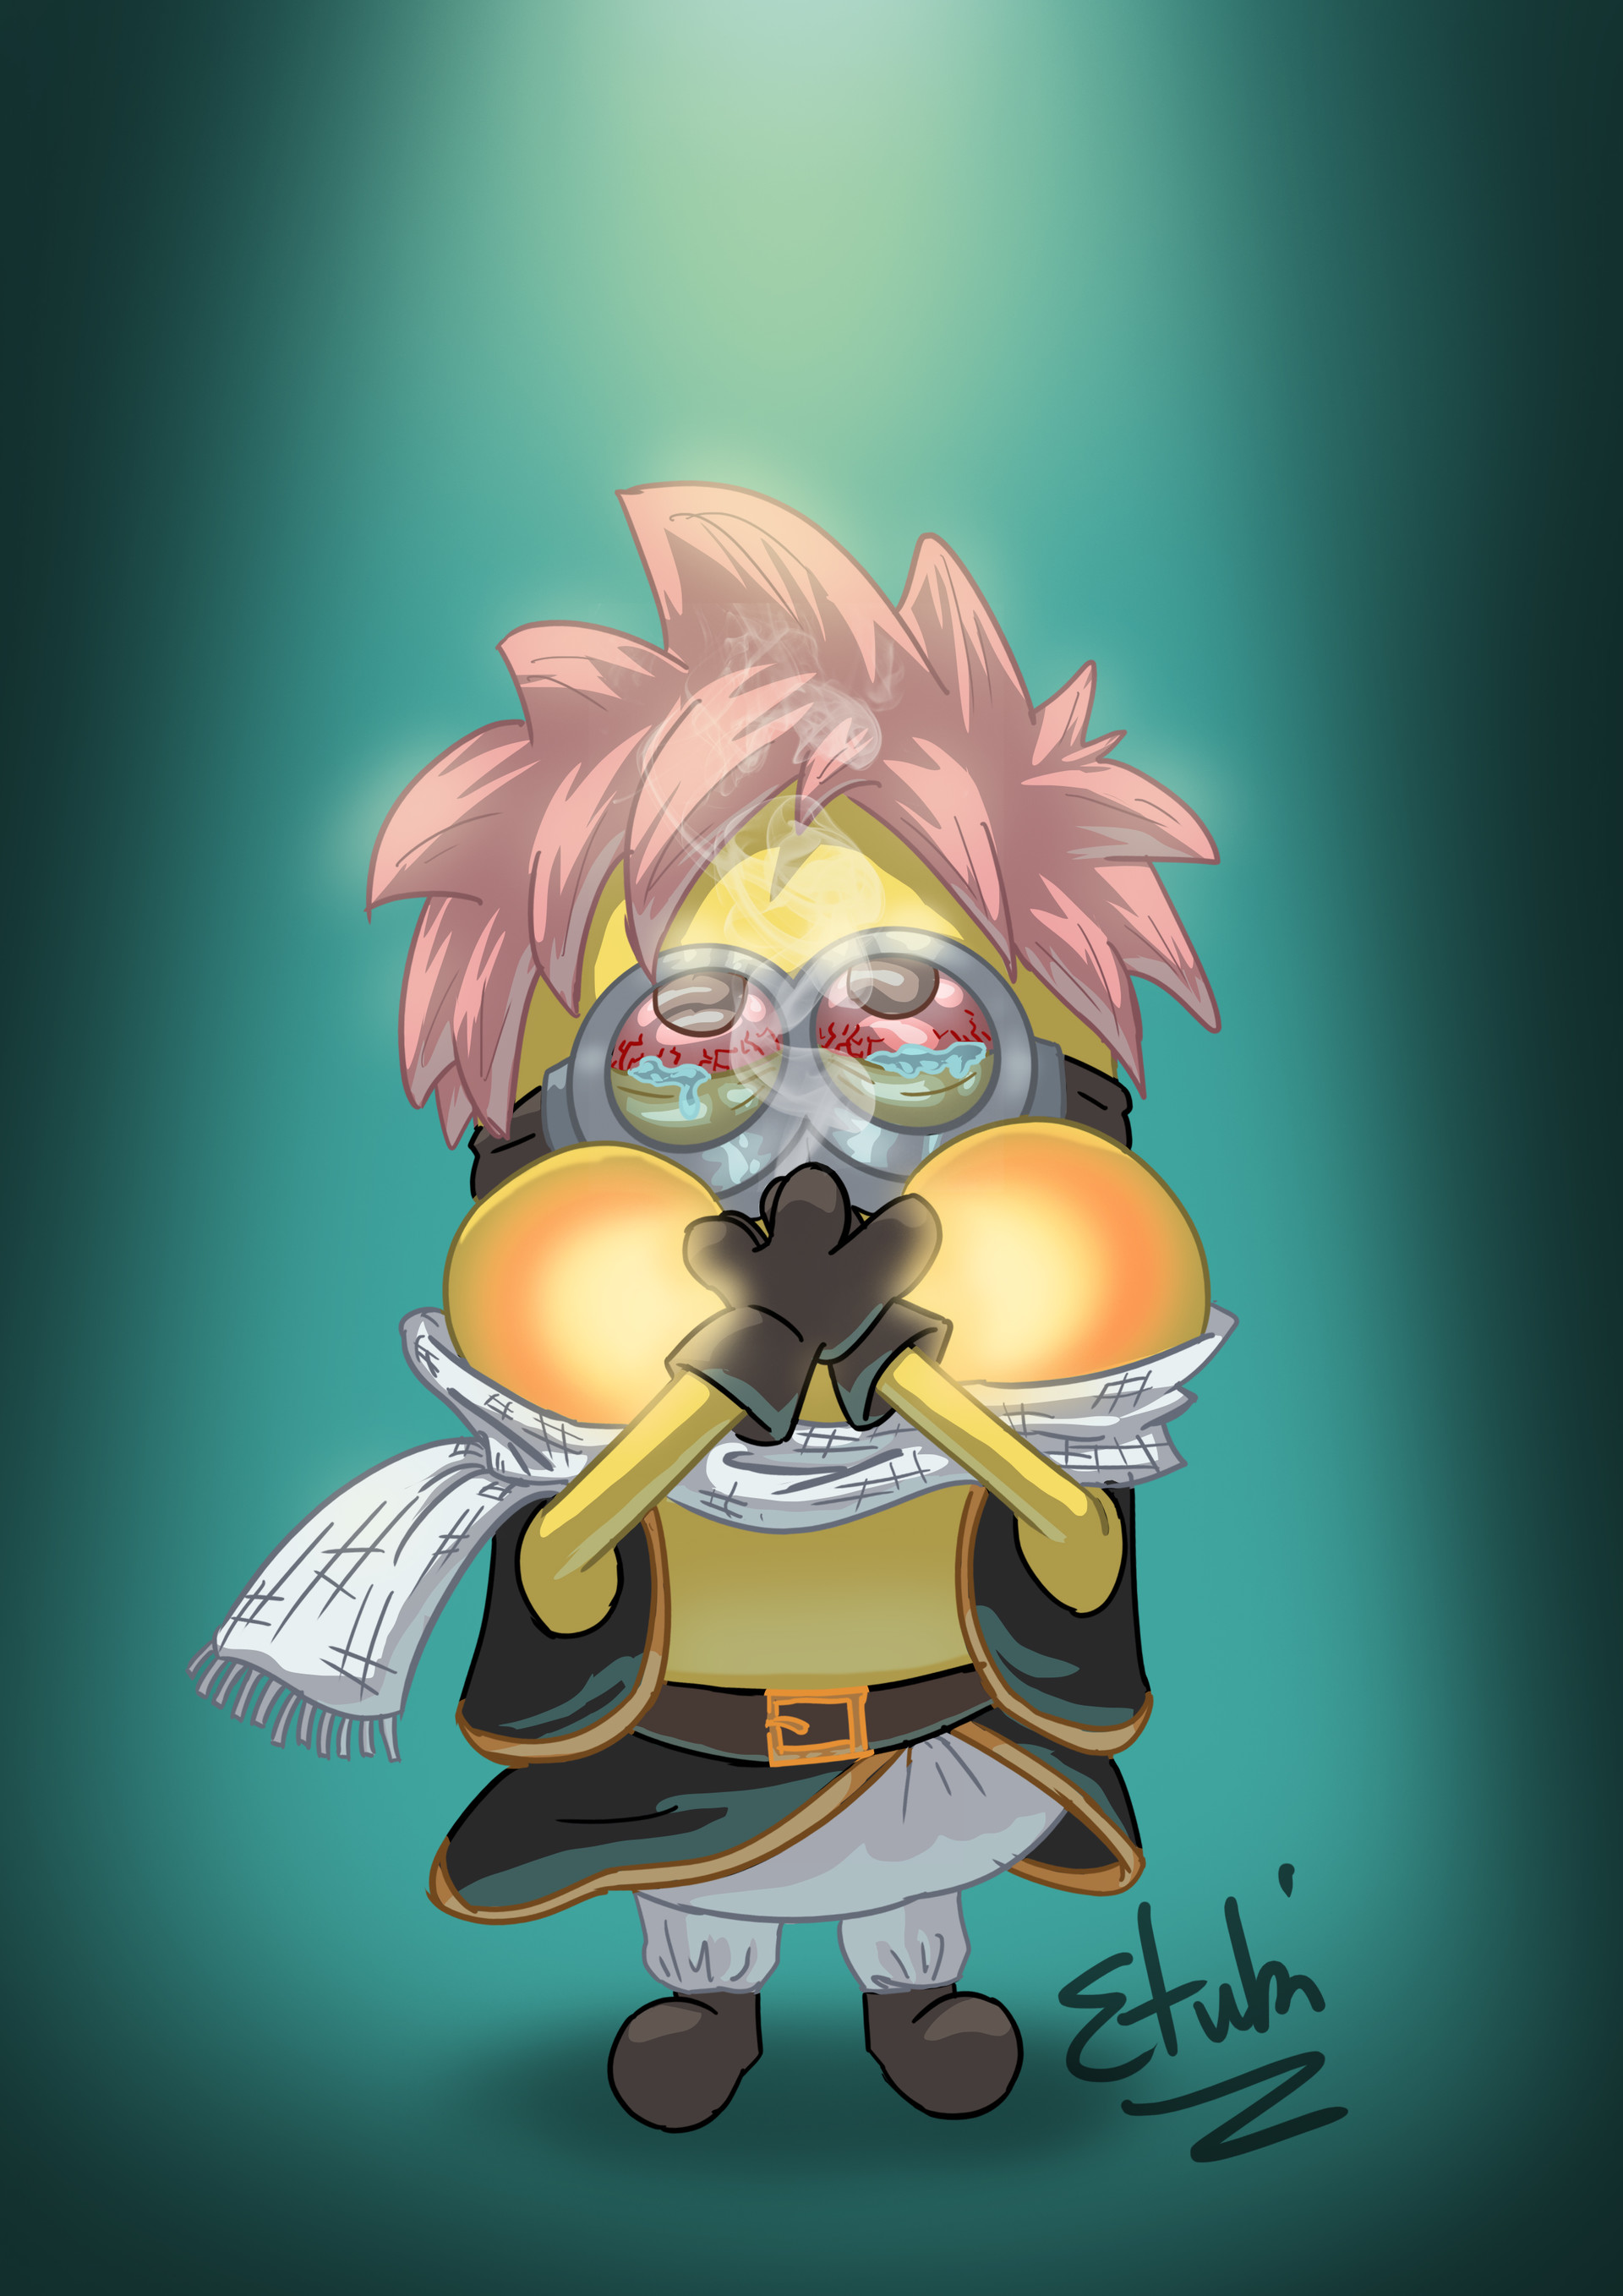 Kevin The Minion (Anime Version) by Bathwaternaxface2010 on DeviantArt